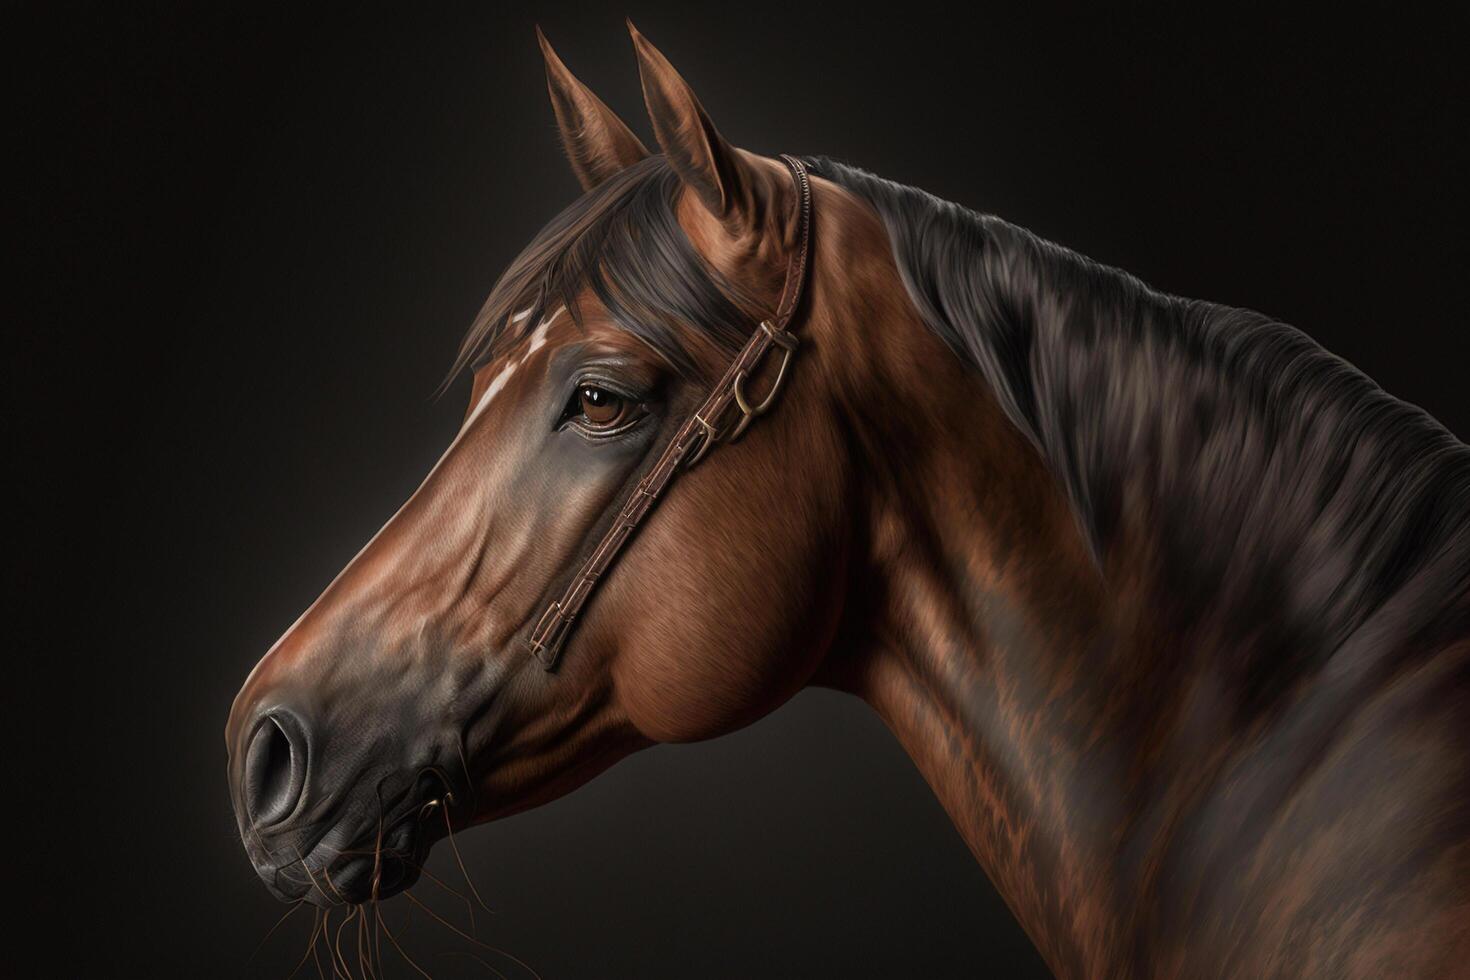 A portrait of a horse in front of a dark background, photo